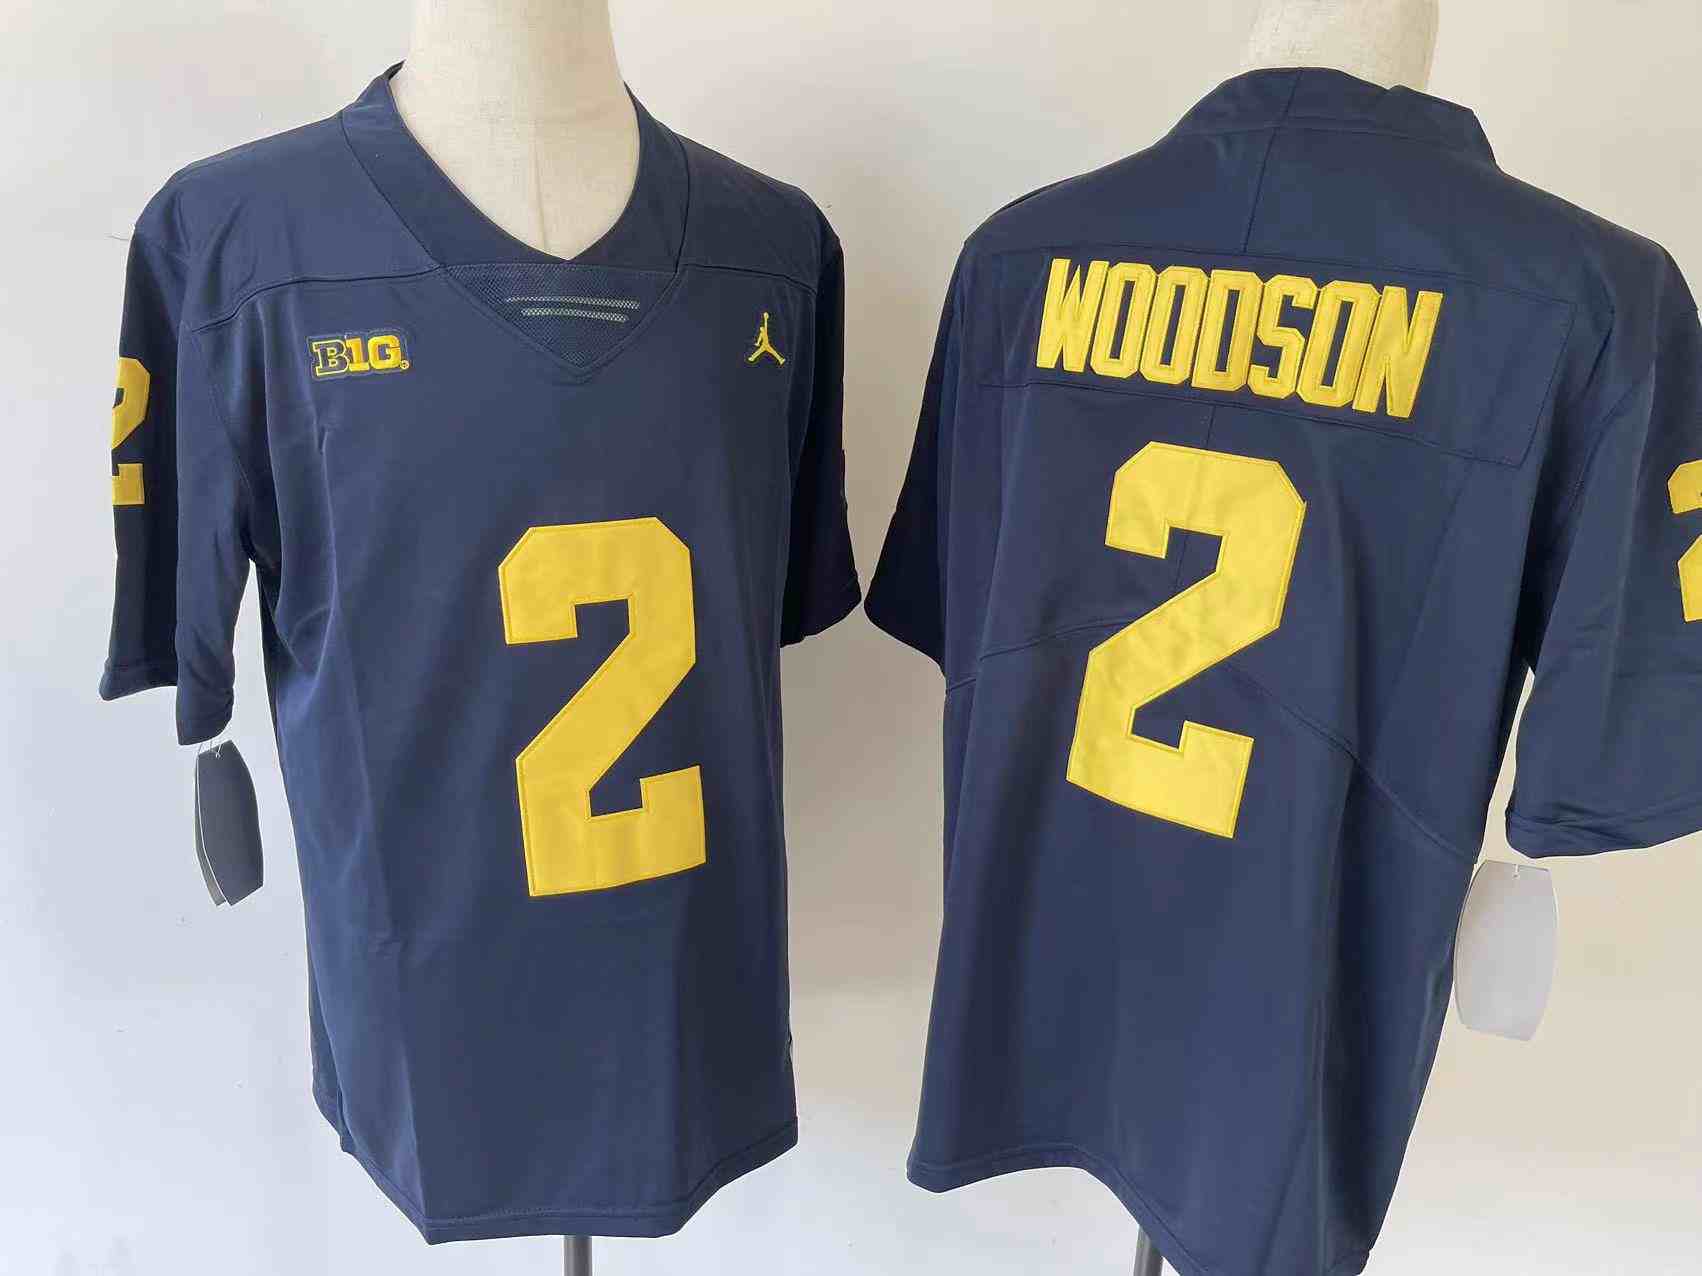 Youth Michigan Wolverines #2 WOODSON Blue Stitched Jersey